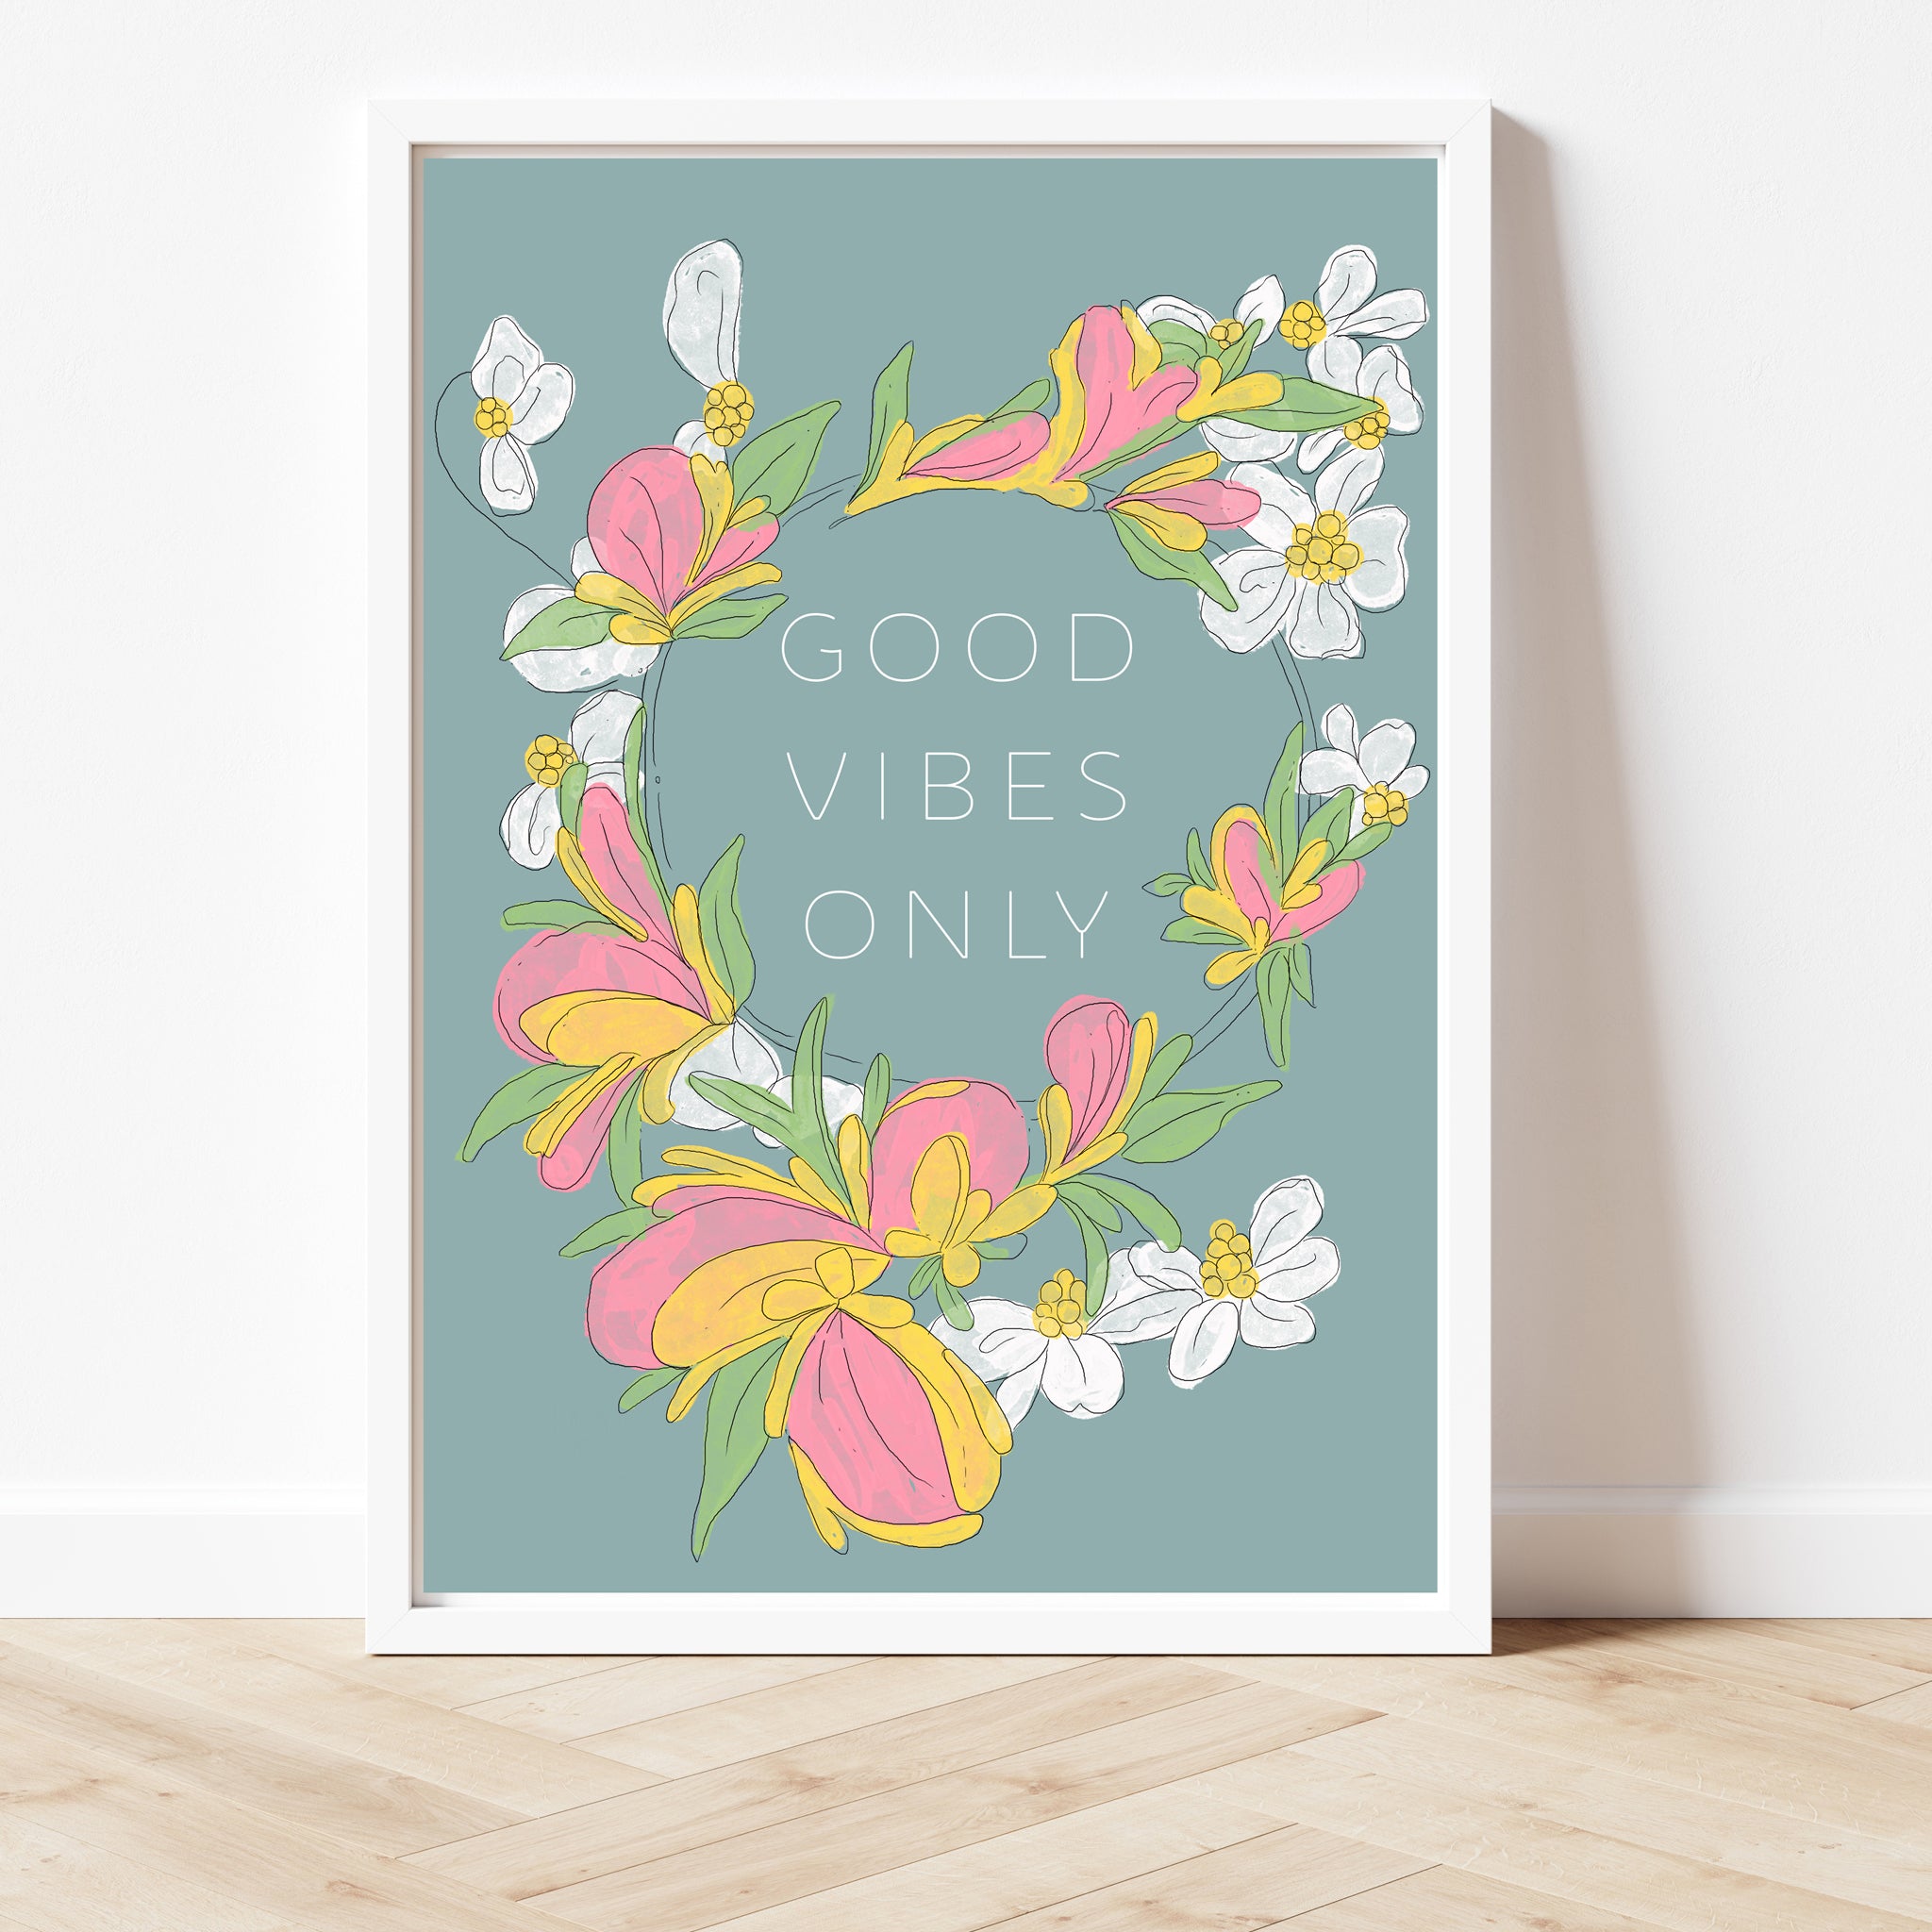 Good vibes only Pink and Yellow flower illustration print